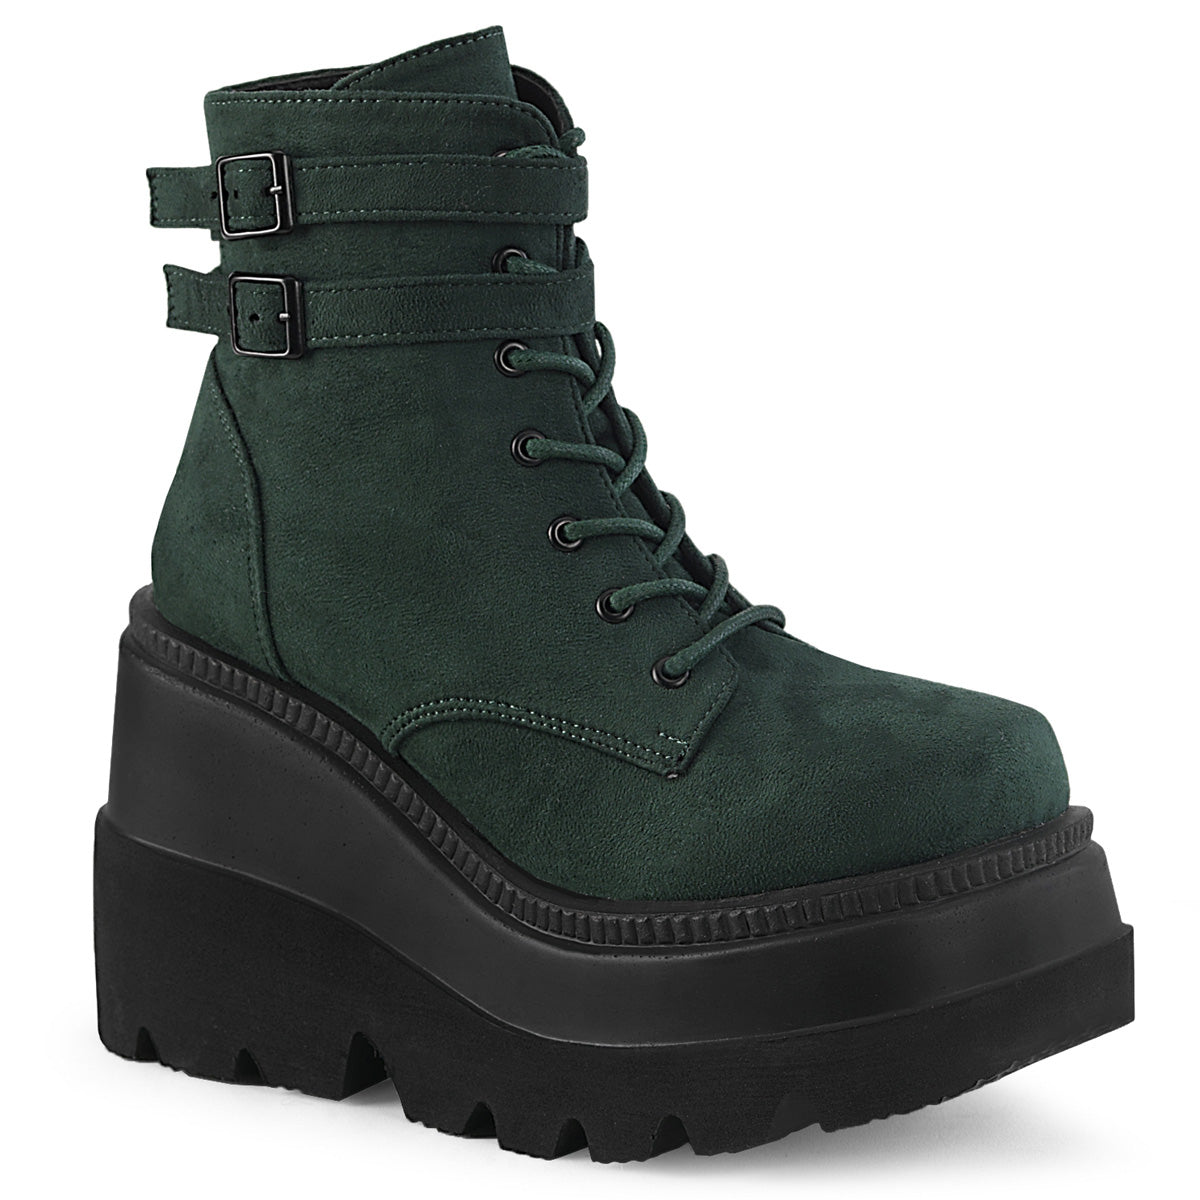 SHAKER-52 Emerald Suede Ankle Boots